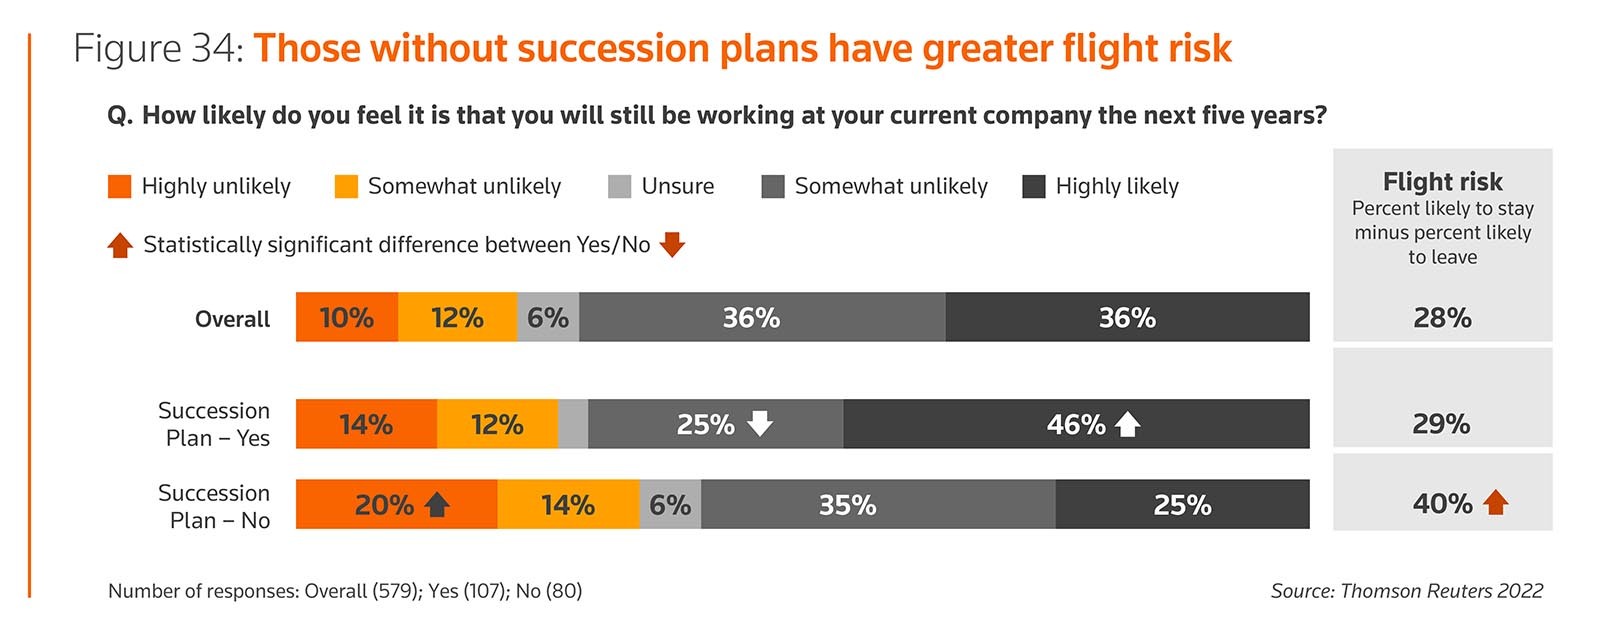 Figure 34: Those without succession plans have greater flight risk